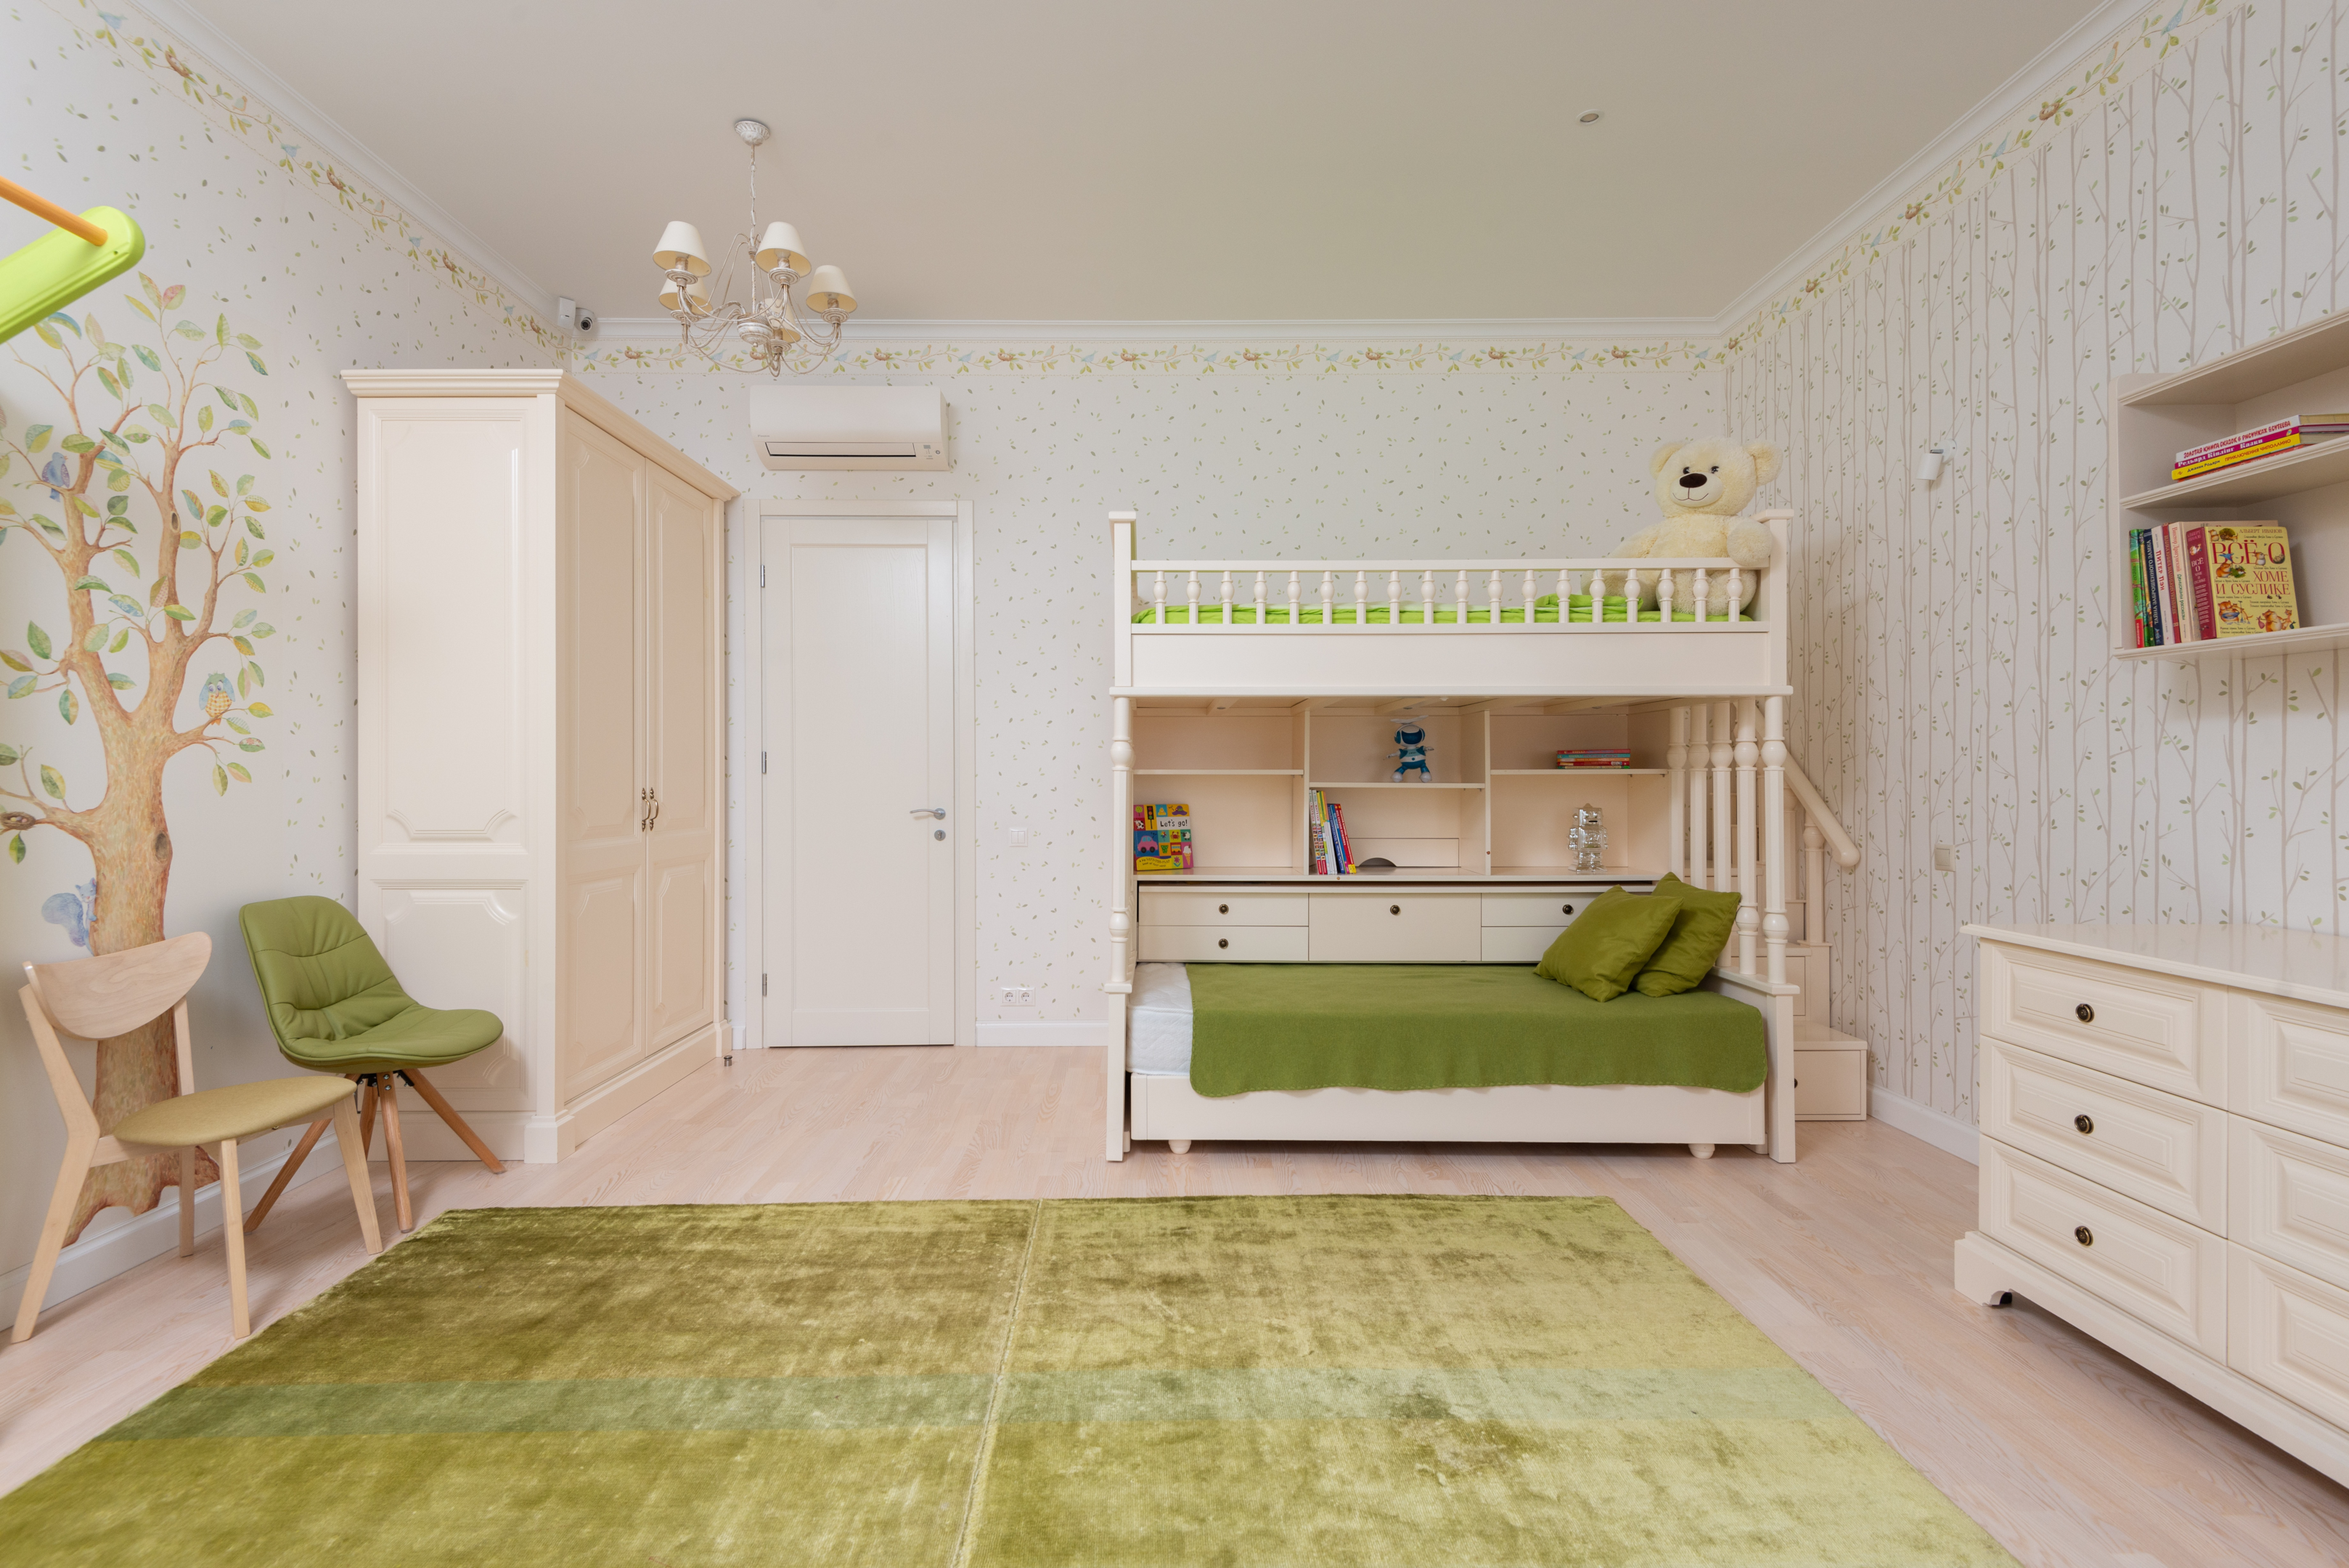 Kids' Bedroom Layout with Bunker Bed